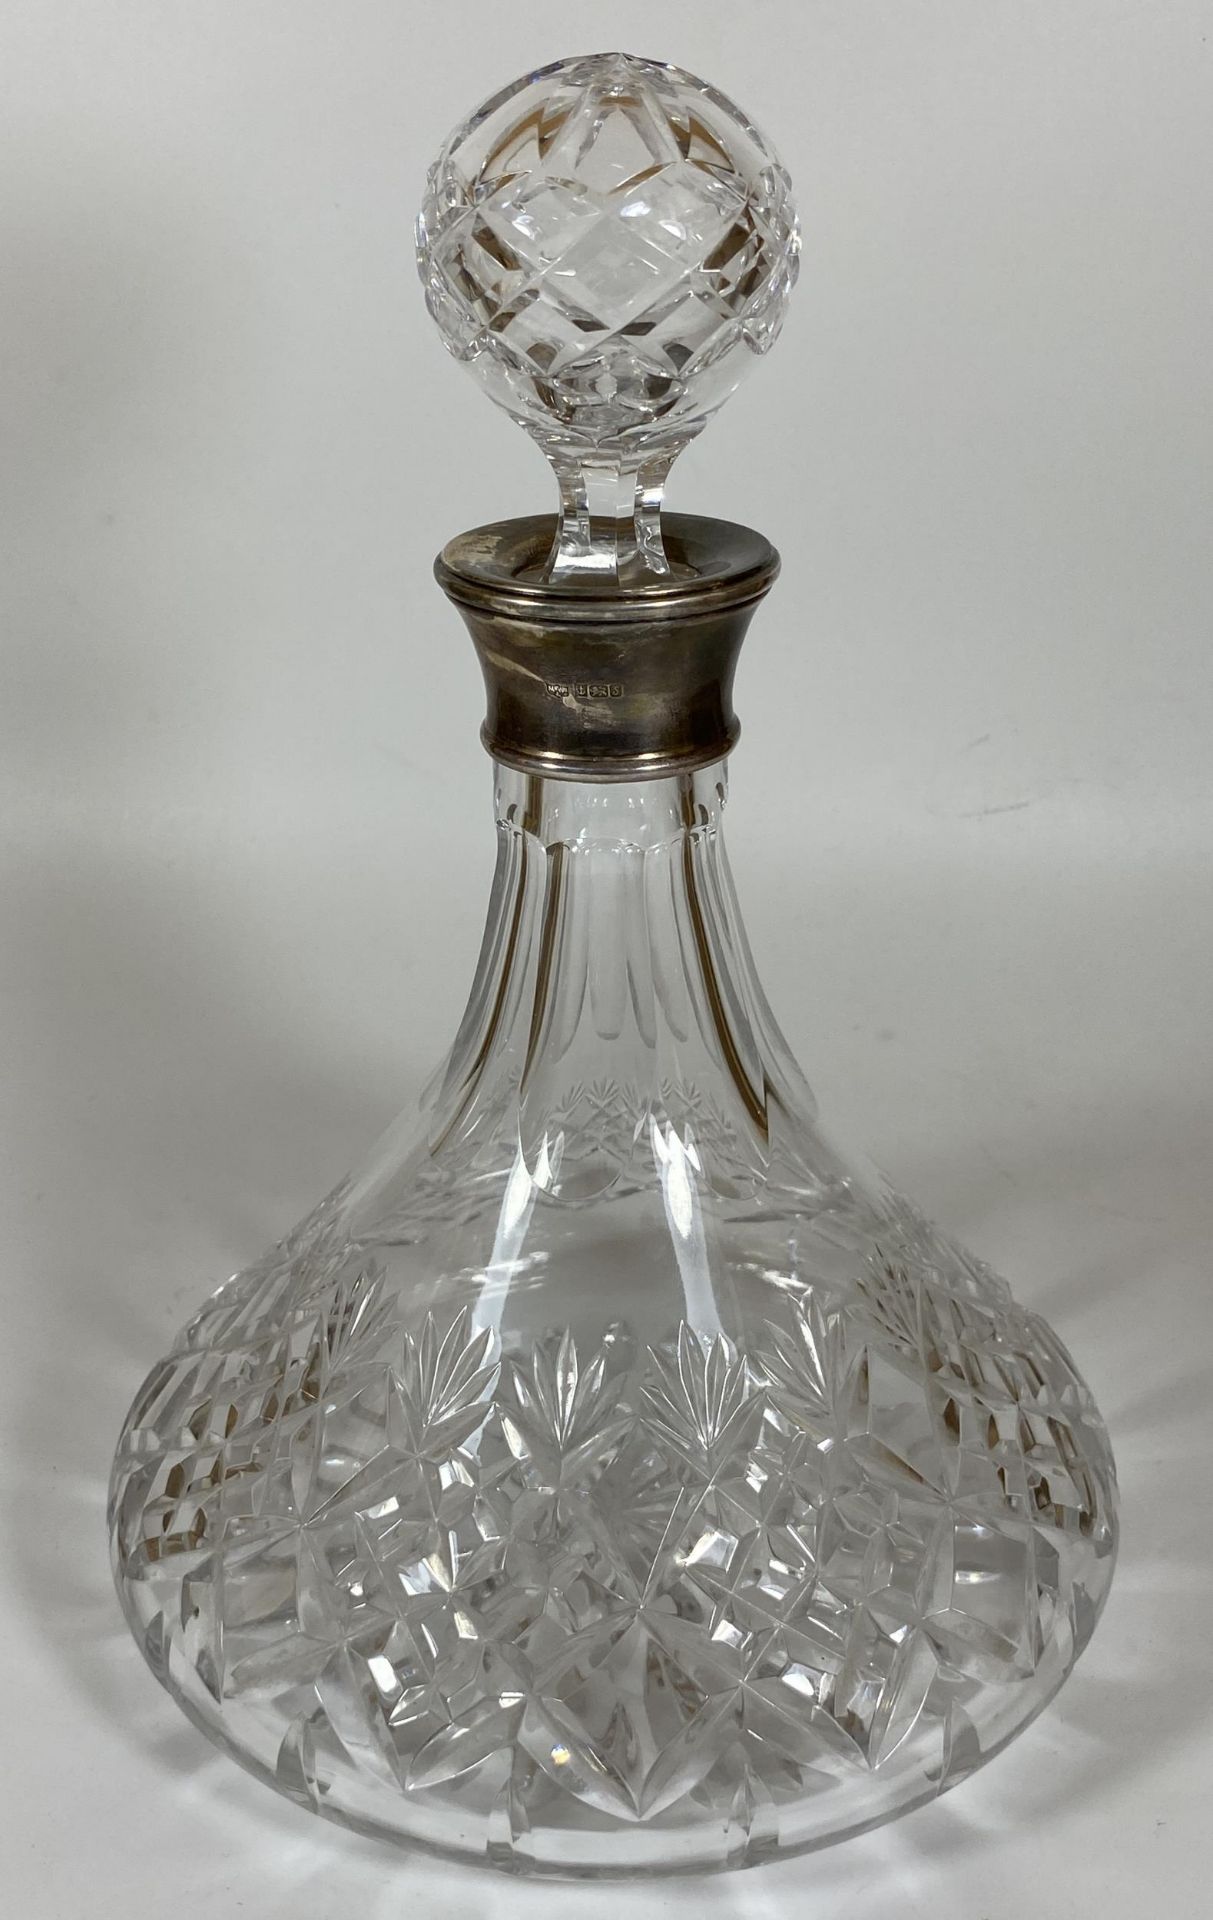 A CUT GLASS SHIPS DECANTER WITH MAPPIN & WEBB HALLMARKED SILVER COLLAR, HALLMARKS FOR BIRMINGHAM